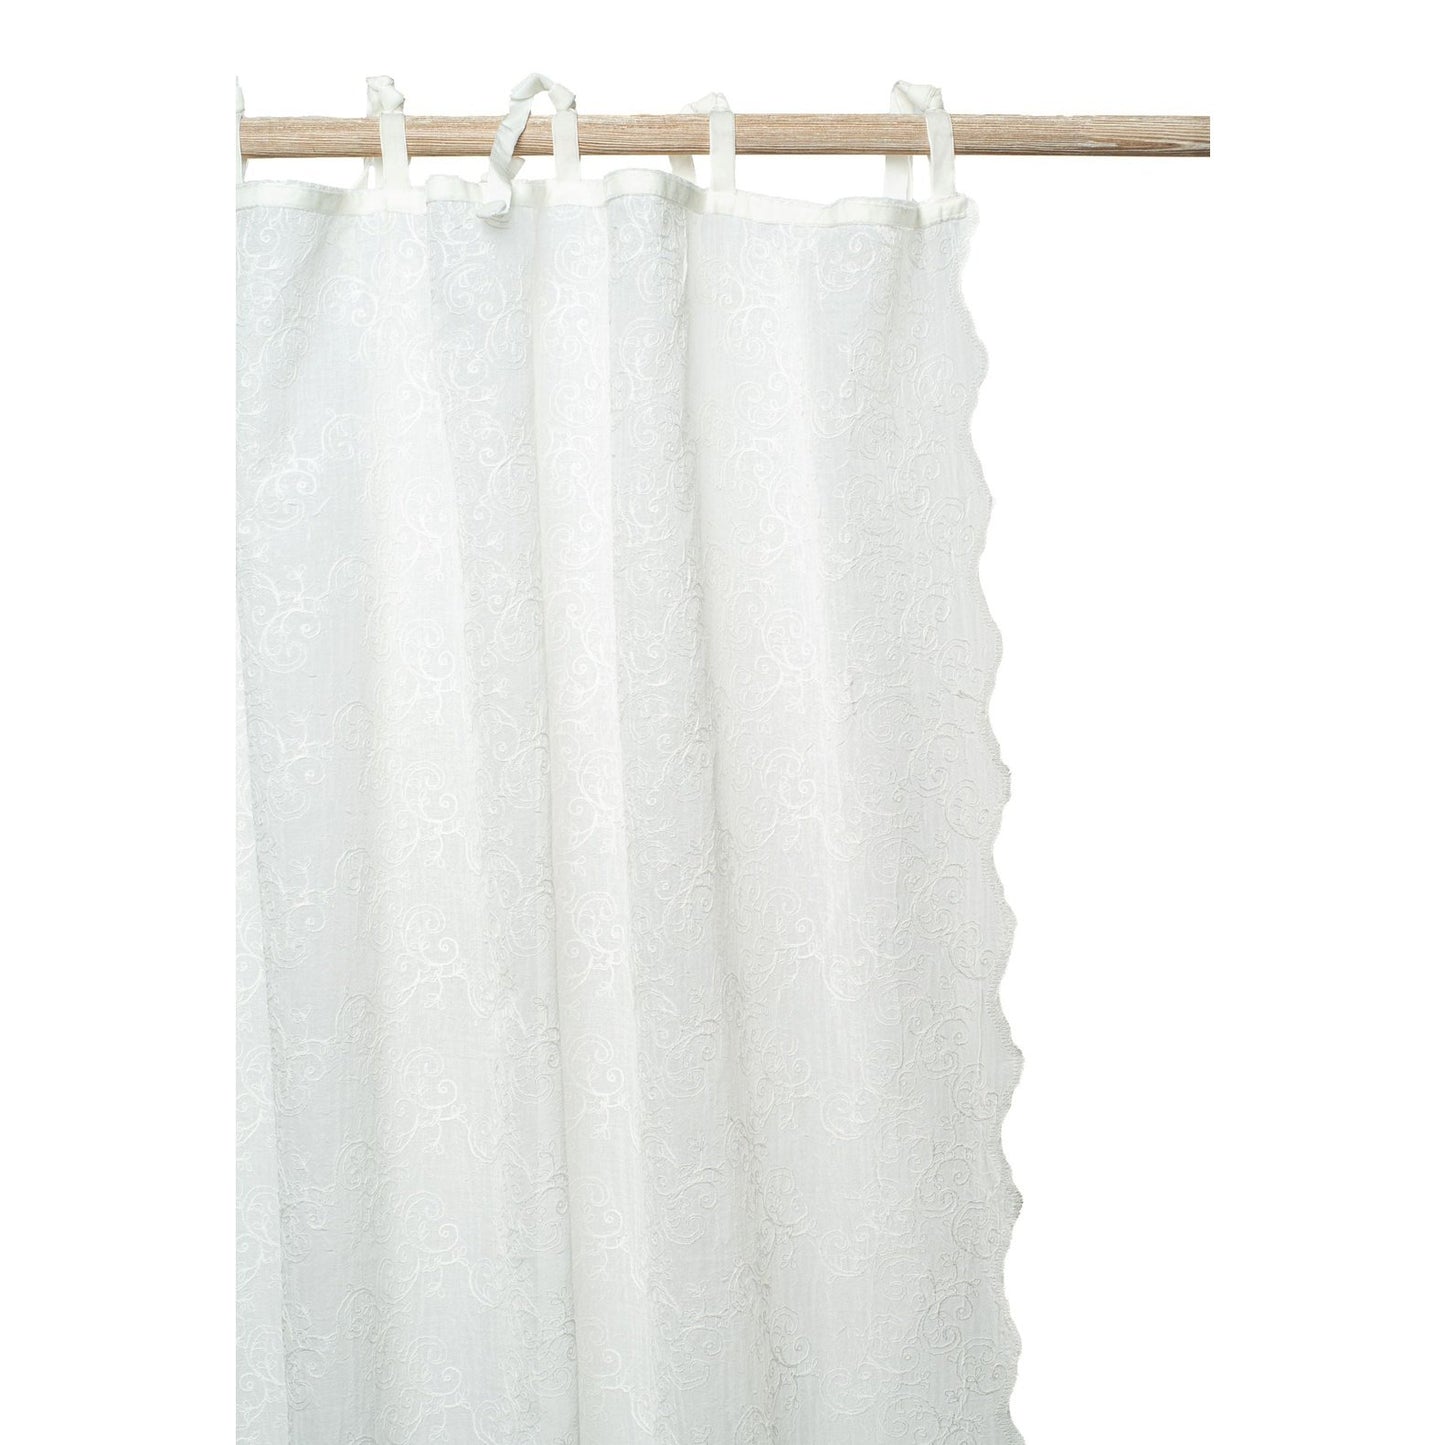 Light-and-airy-embroidered-voile-curtain-billowing-in-the-breeze.